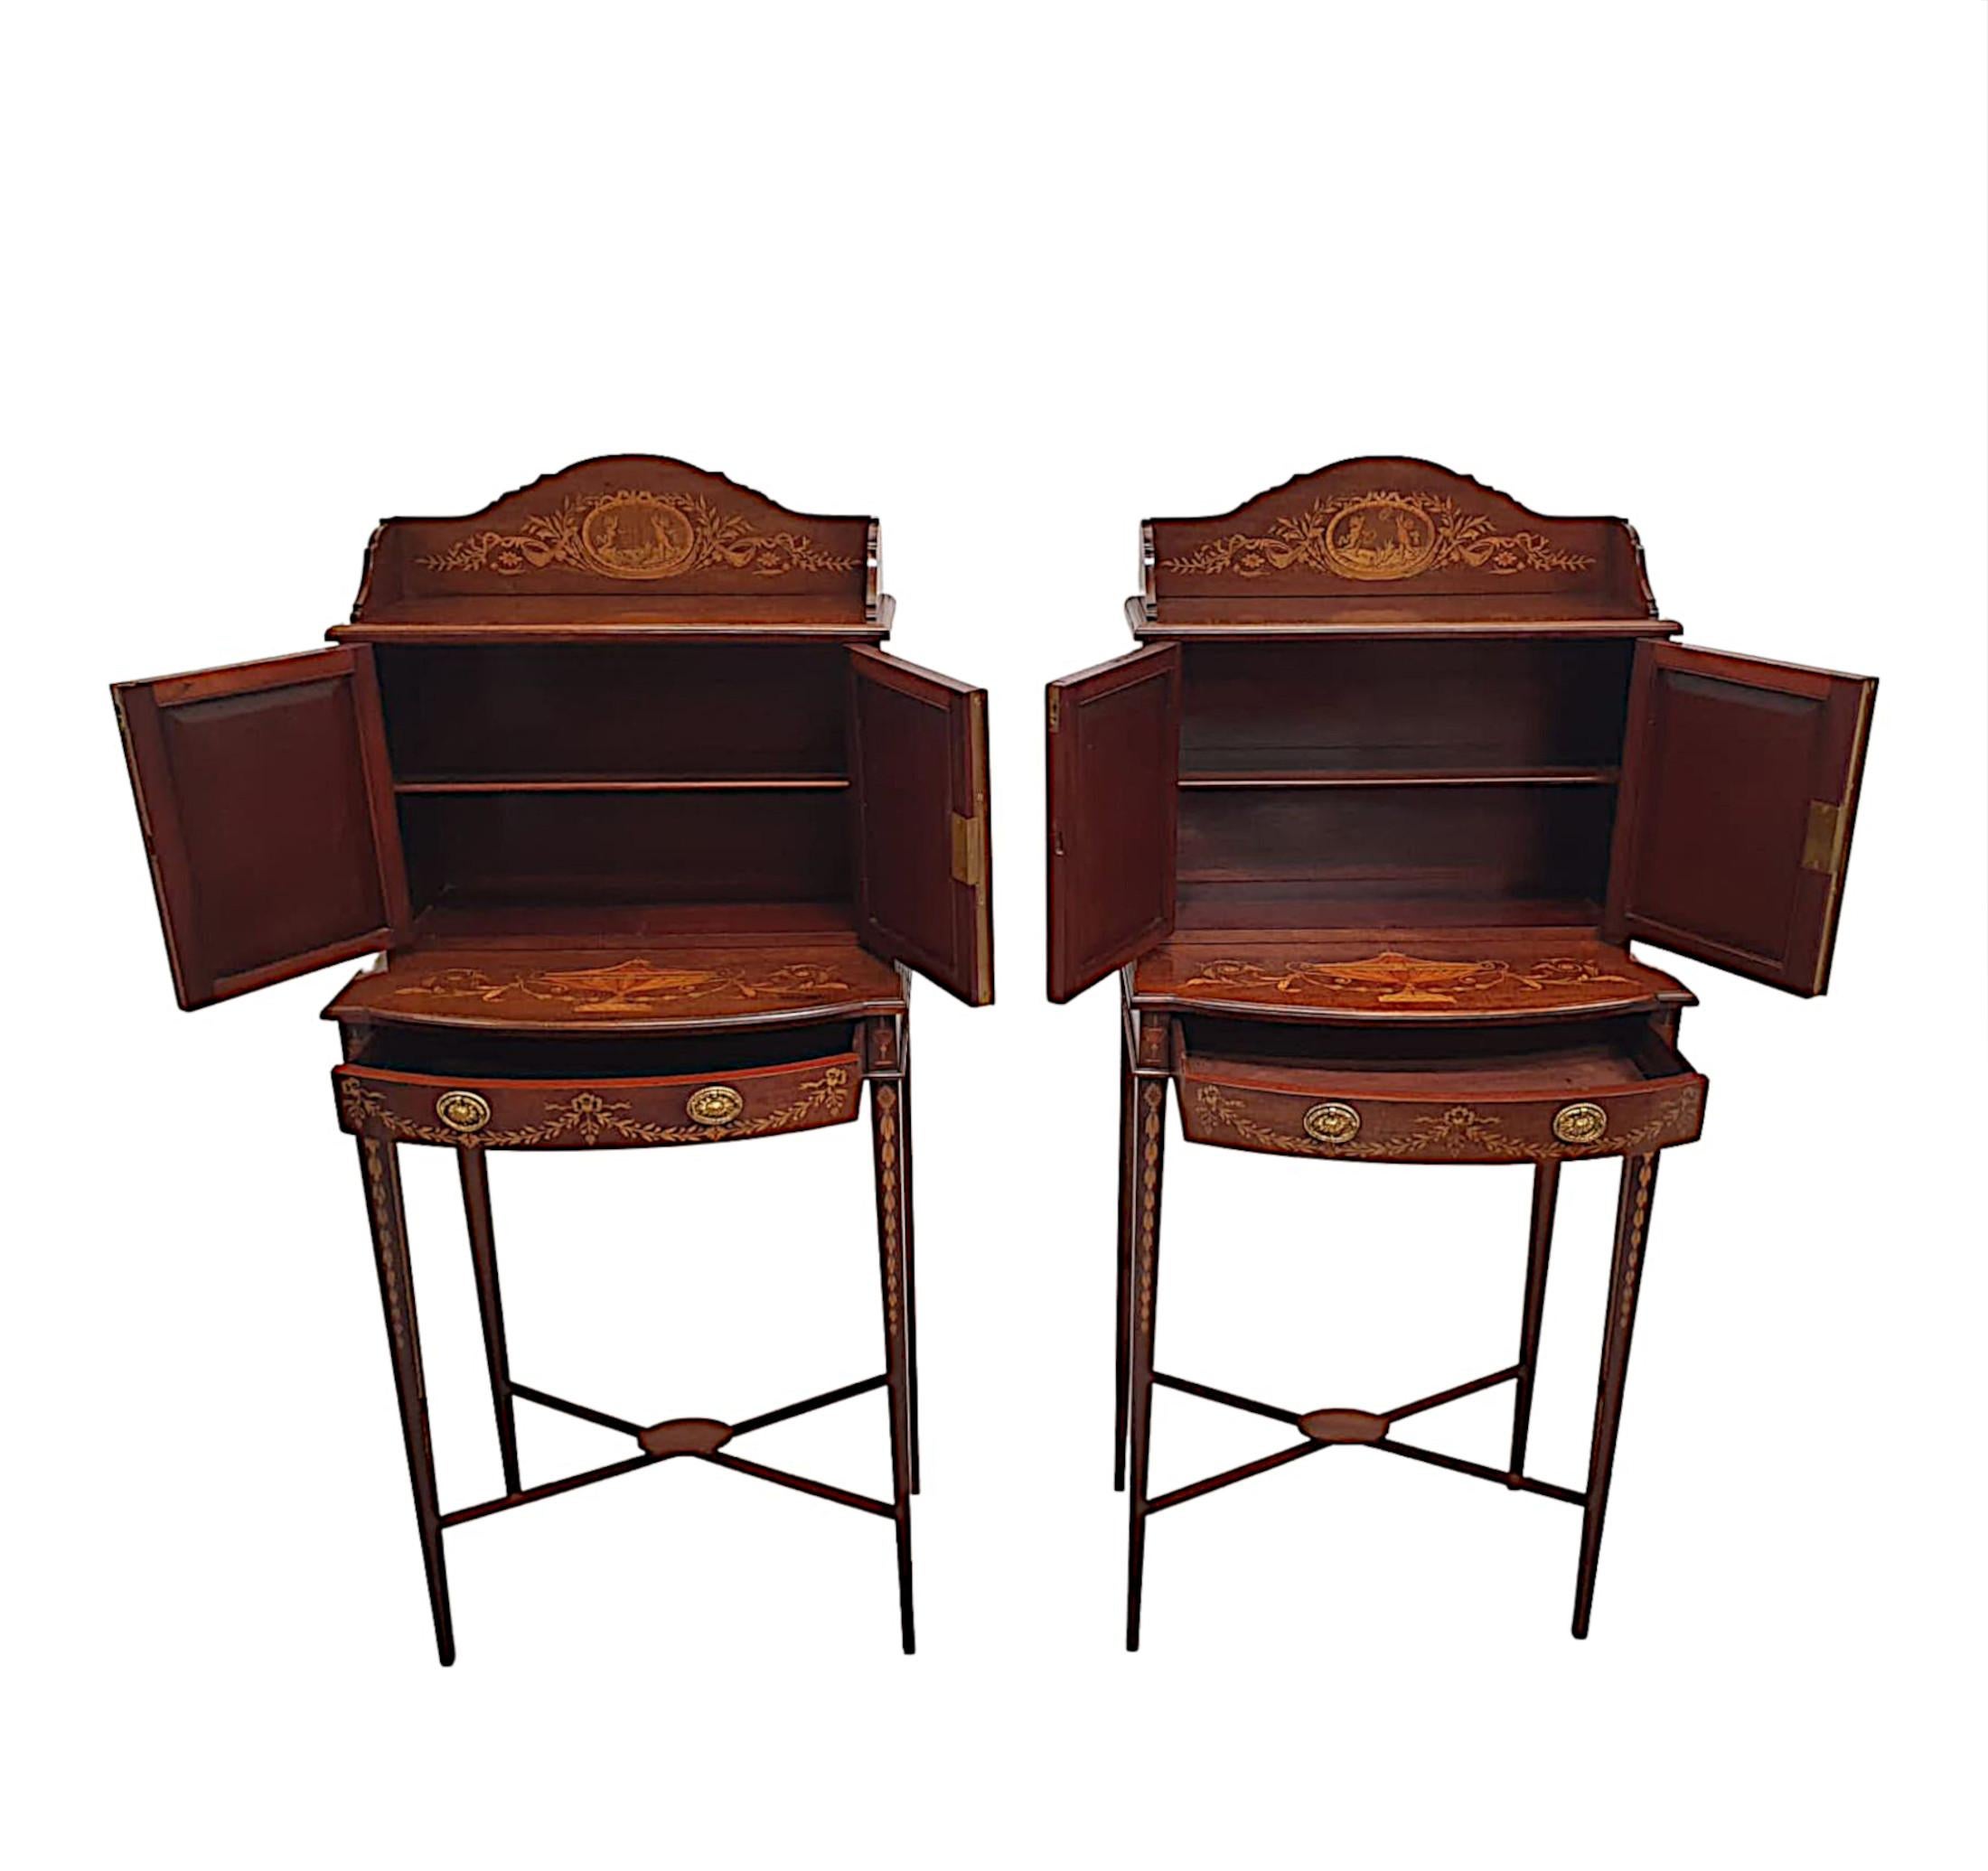  A Rare Pair of Exceptional Edwardian Cabinets Attributed to Edward and Roberts In Good Condition For Sale In Dublin, IE